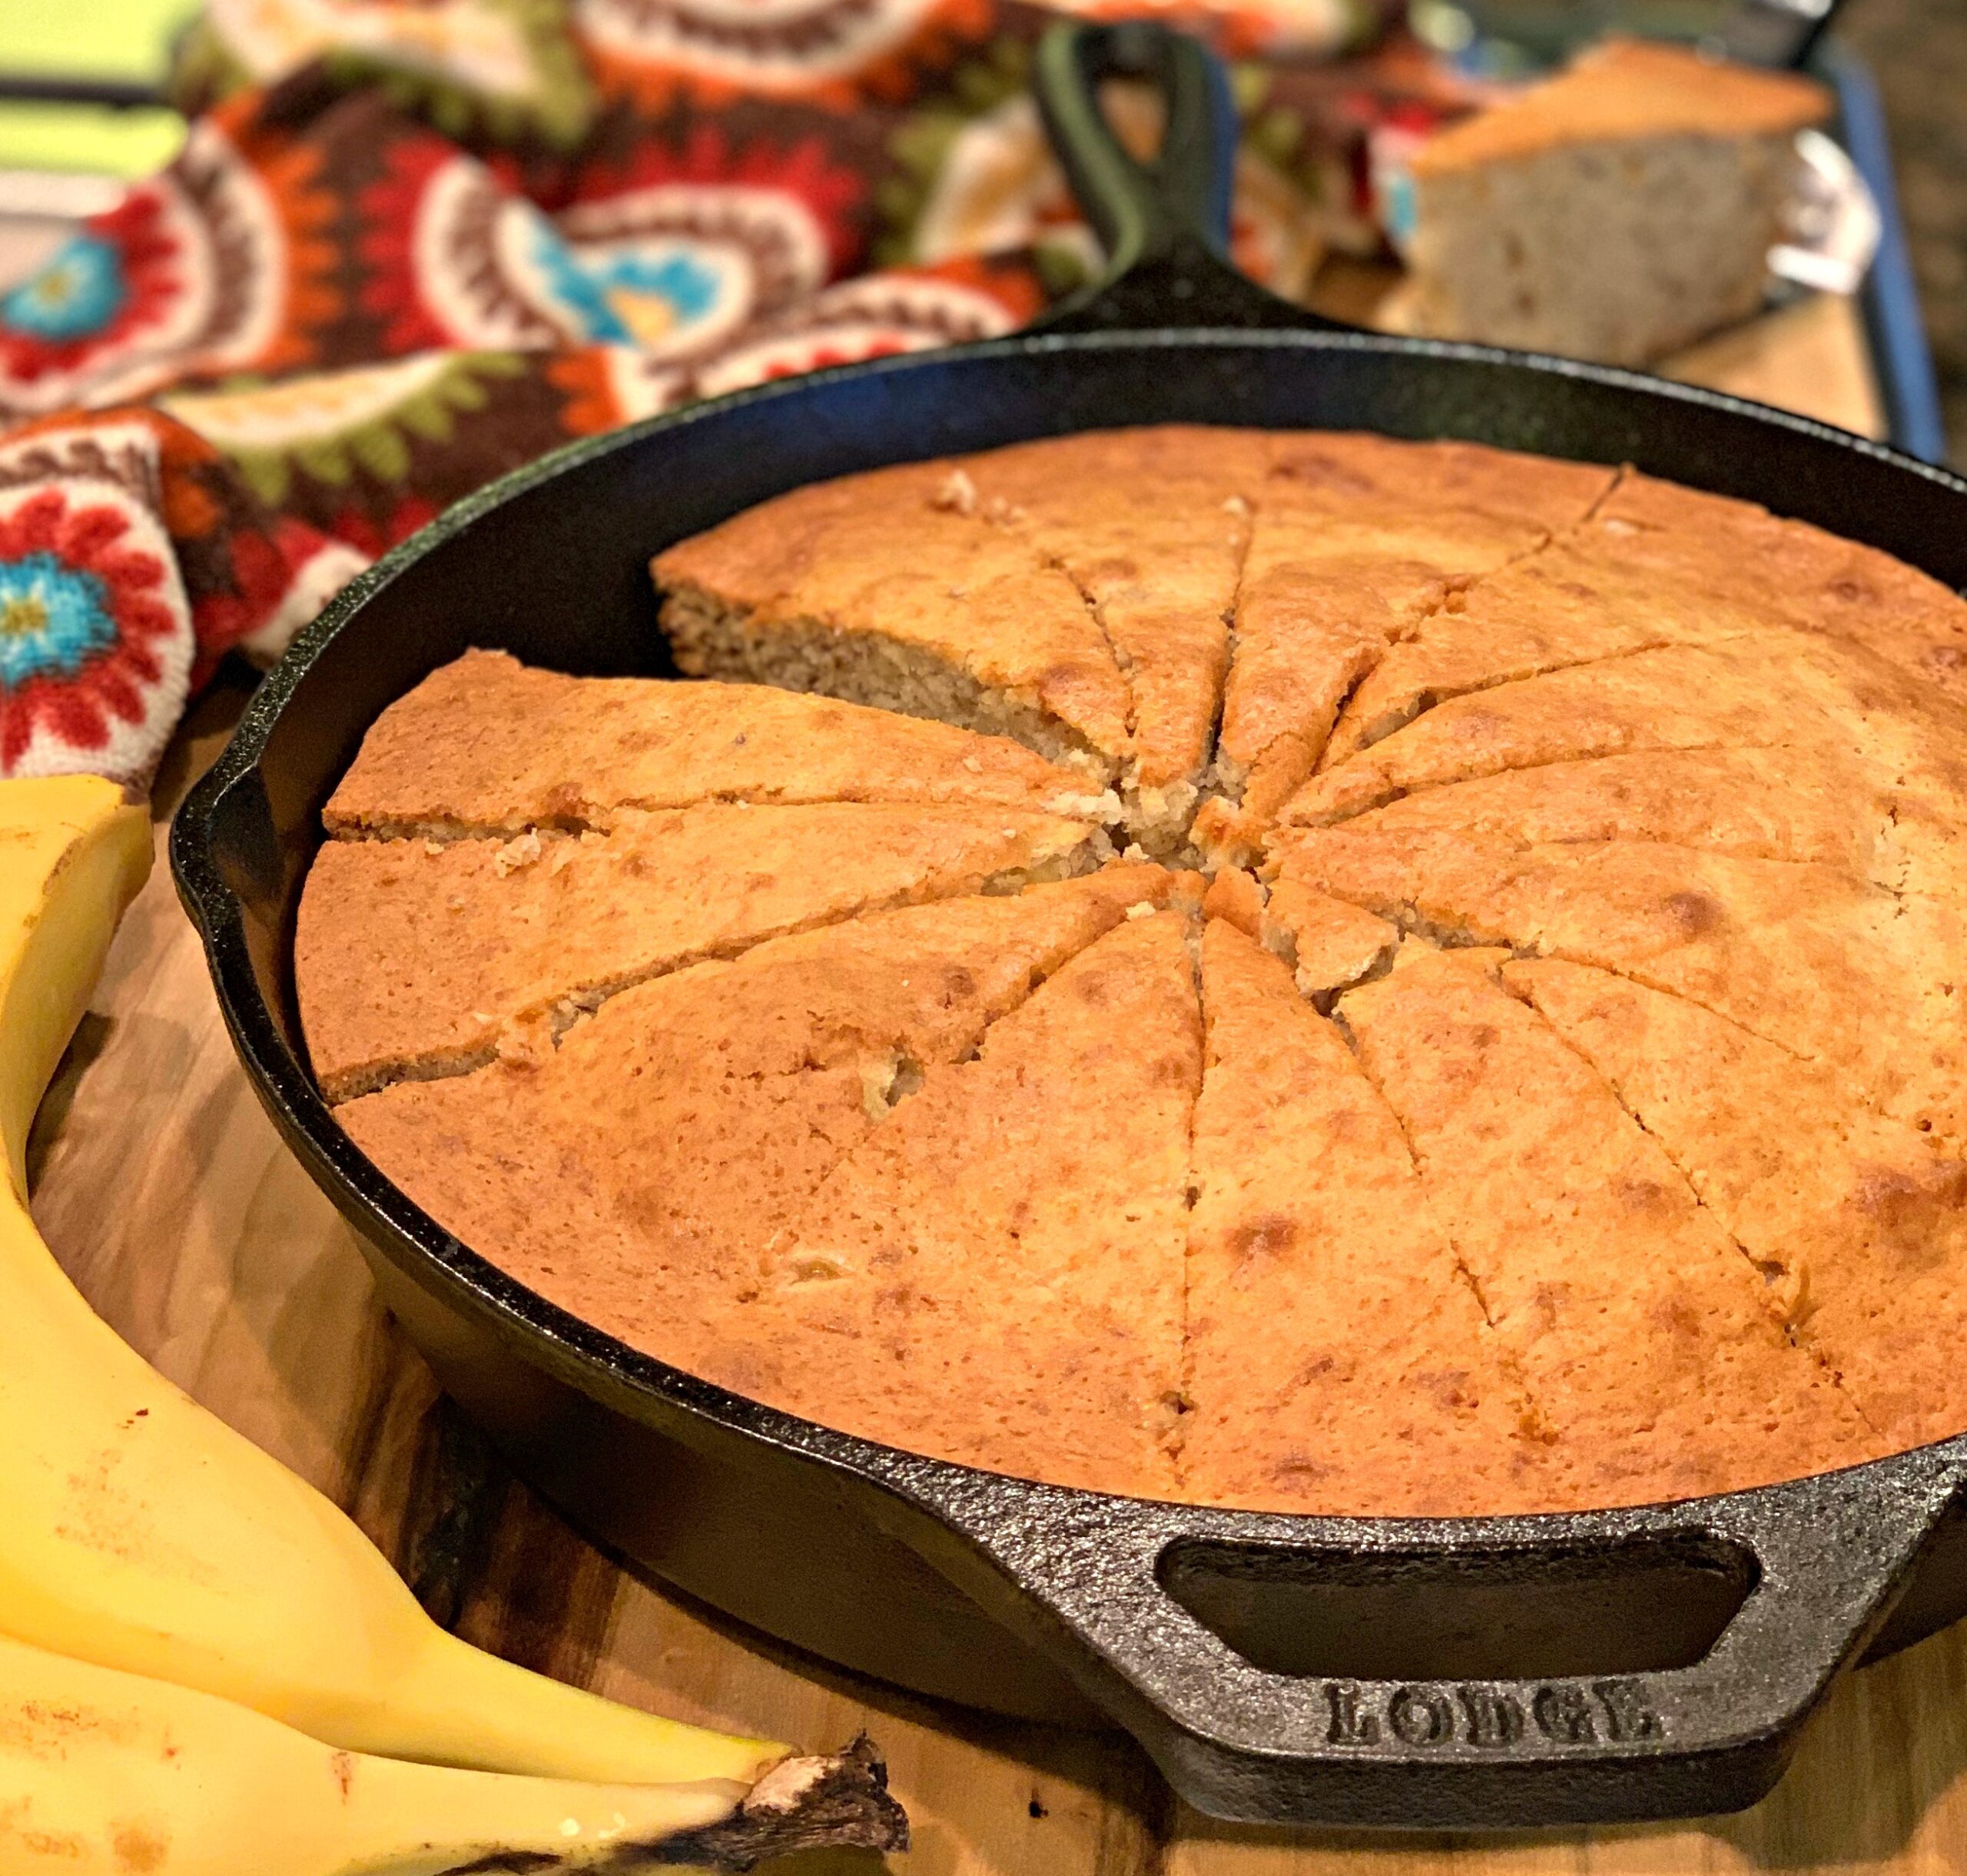 Cast Iron Skillet Banana Bread - The Cookin Chicks